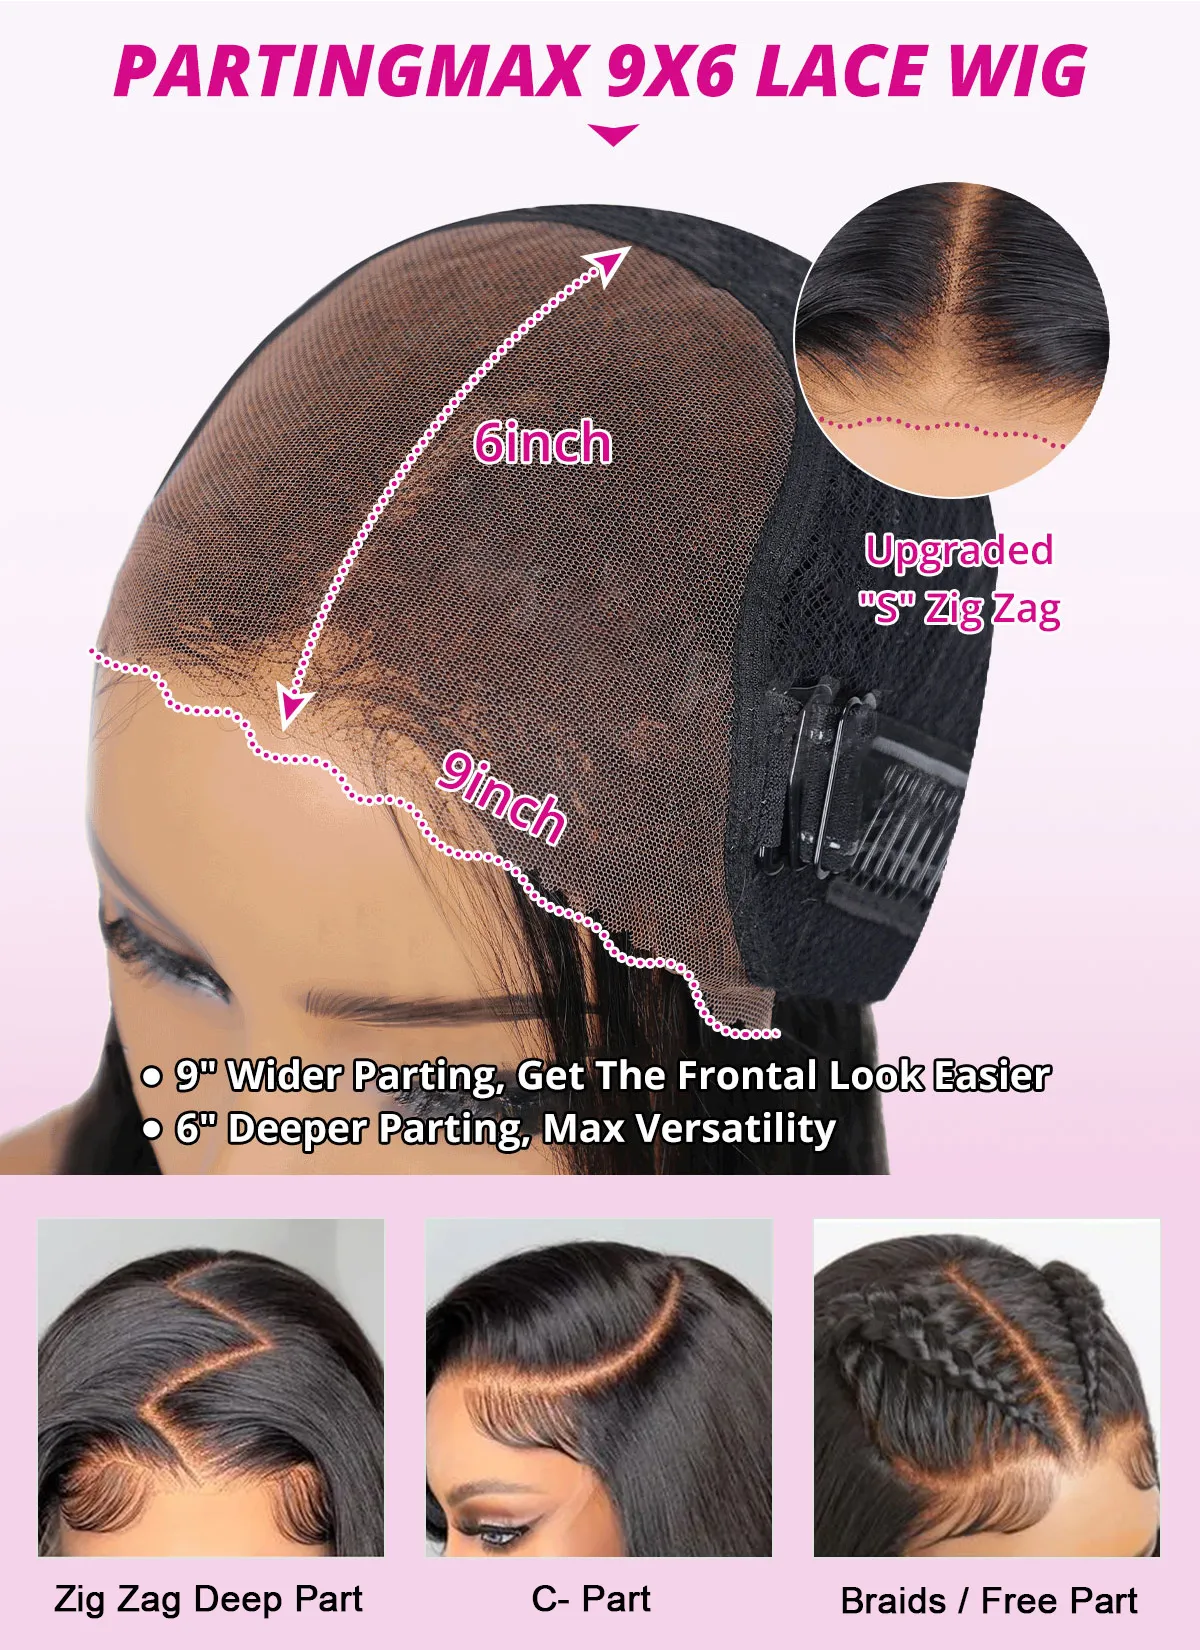 Tinashe hair partingmax 9x6 lace wig details 1